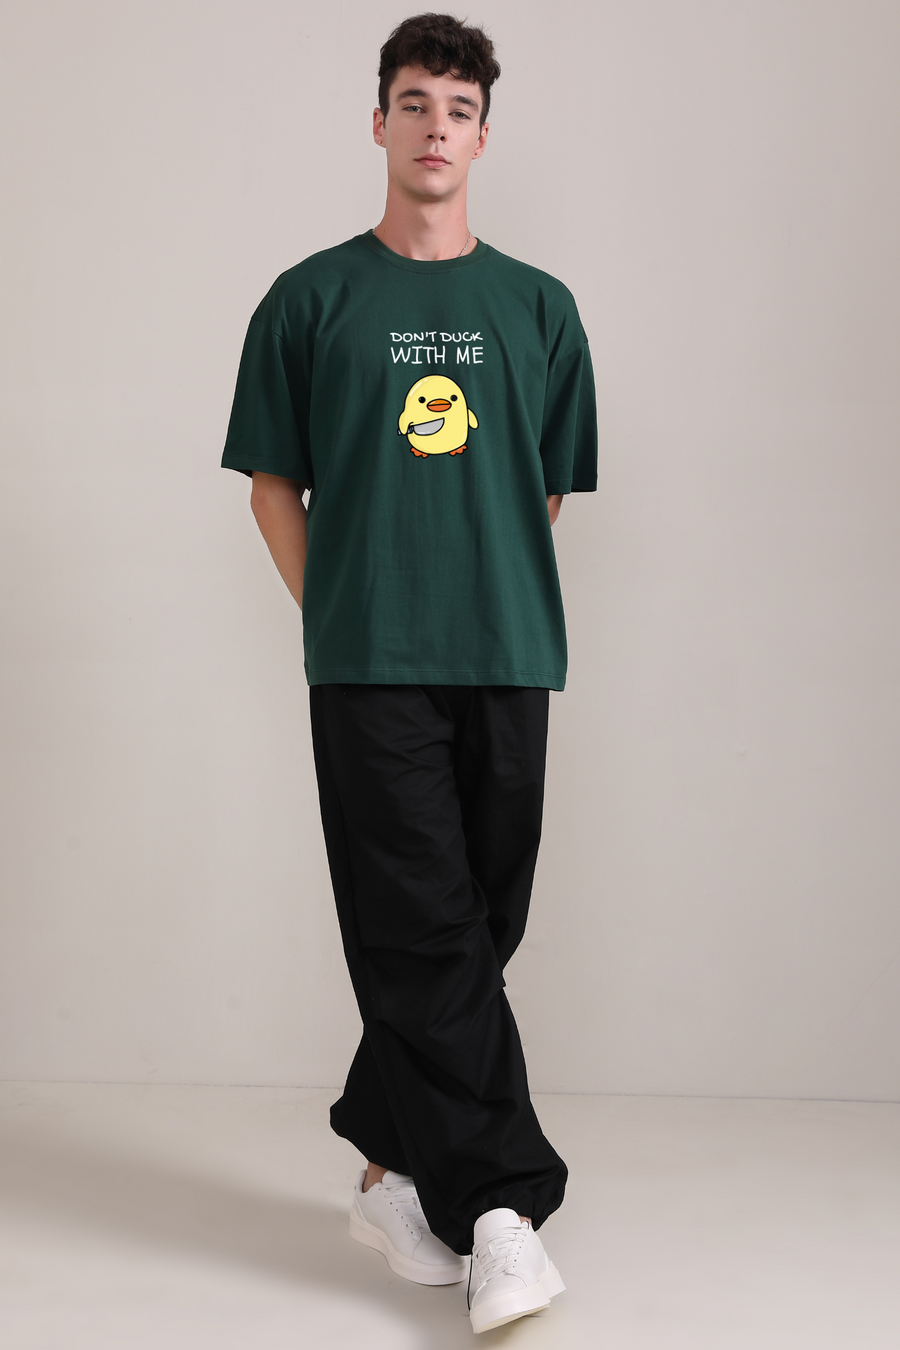 Don't duck with me- Oversized t-shirt